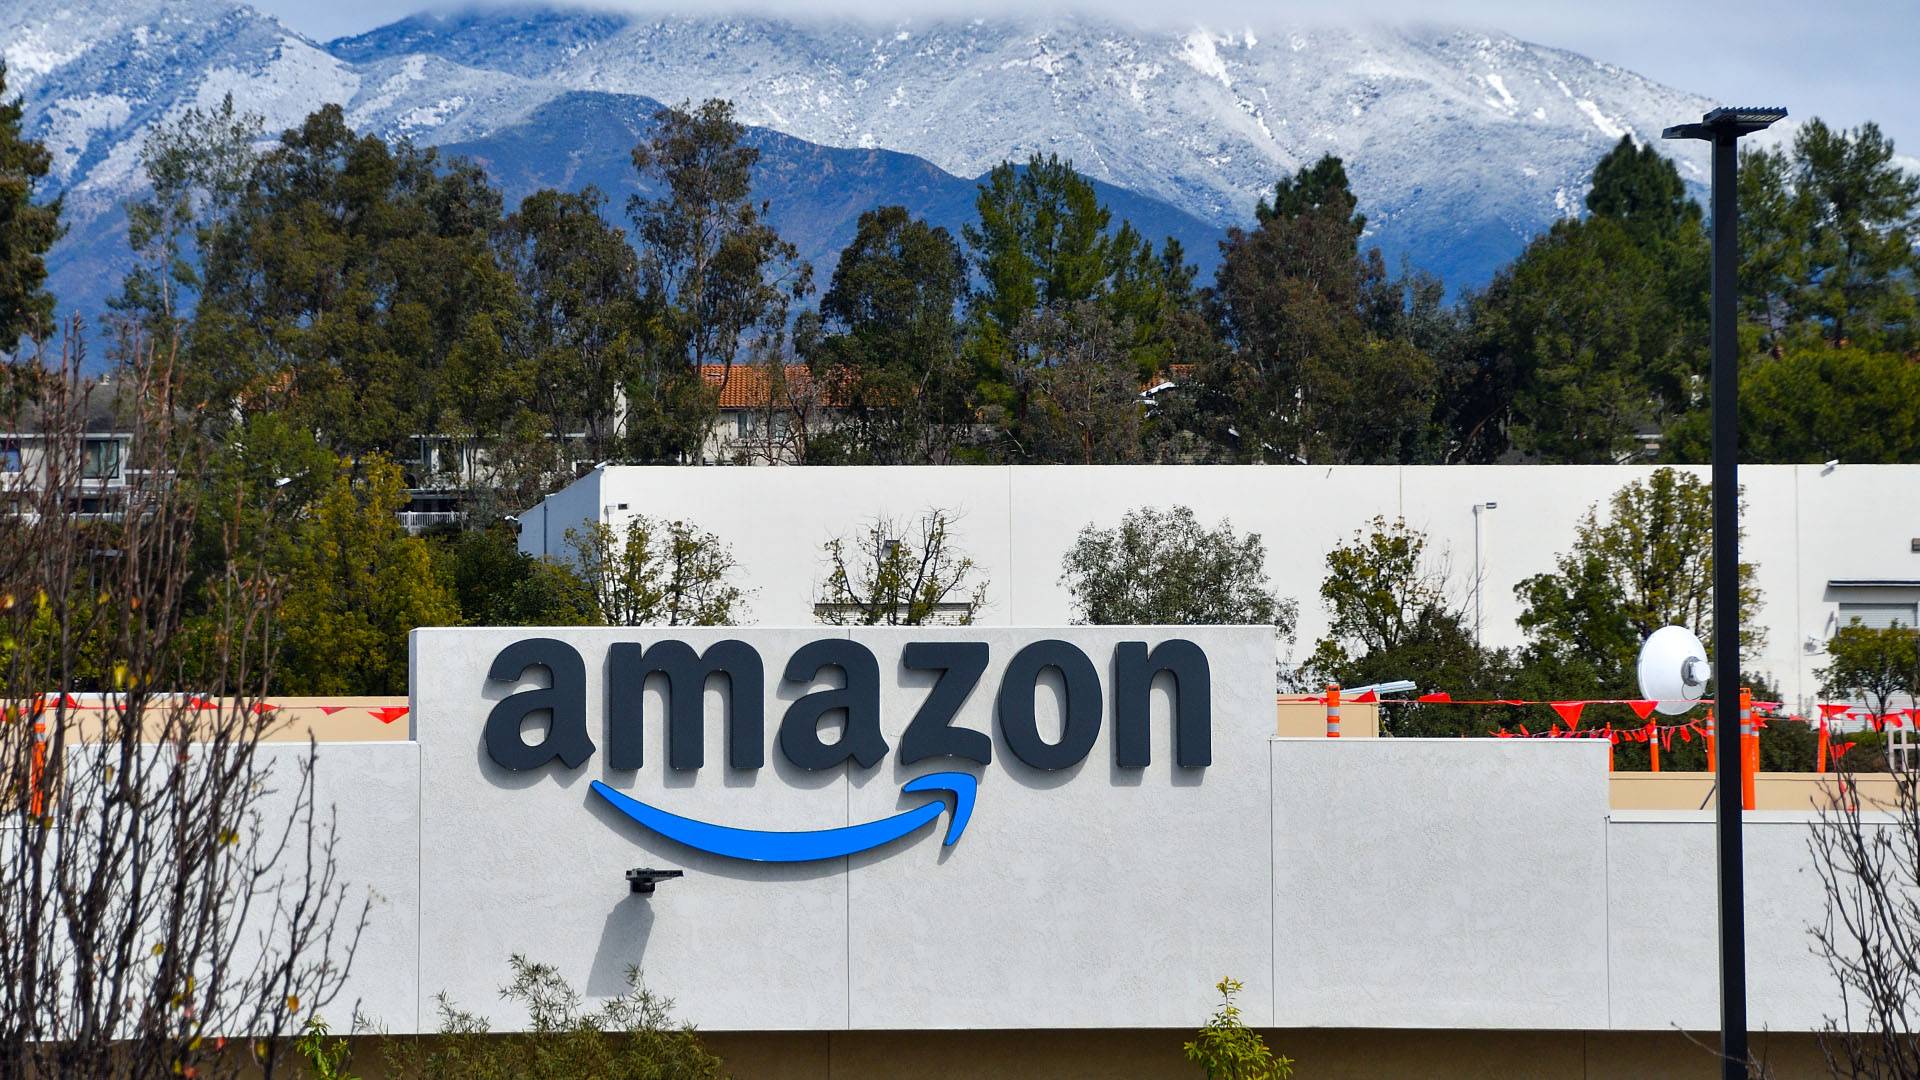 Amazon Opened 15+ sites across Southern California in 2021- To add 2500 Jobs in the region